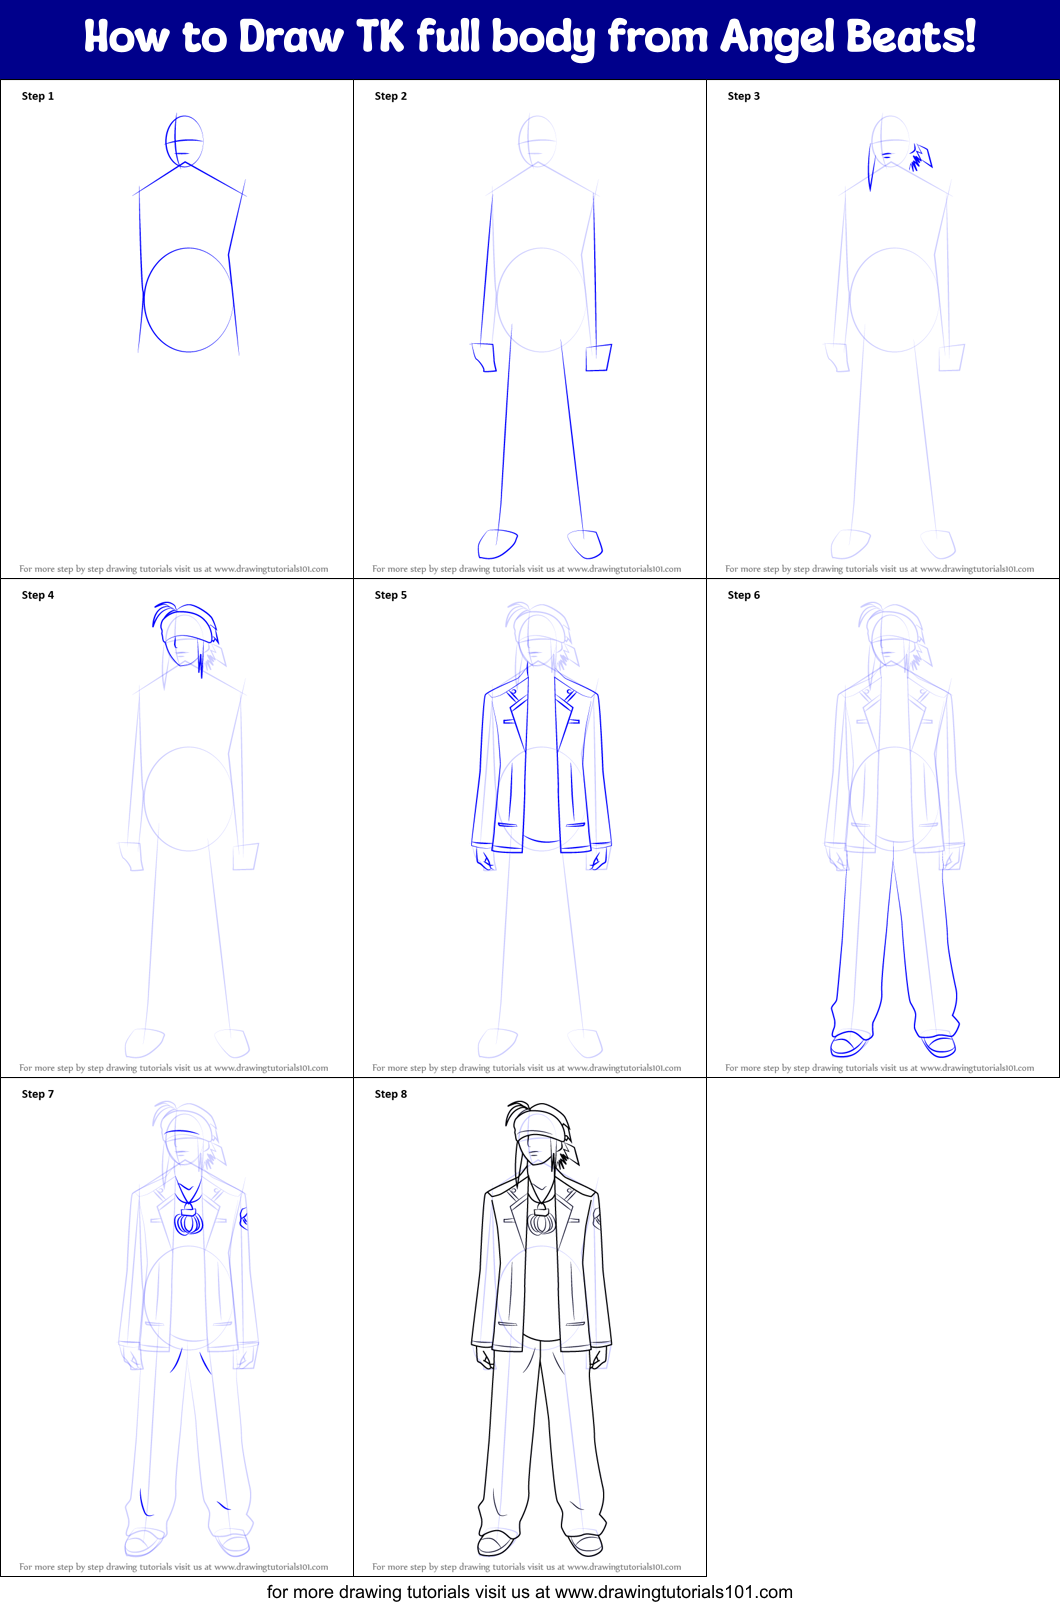 How To Draw Tk Full Body From Angel Beats Printable Step By Step Drawing Sheet Drawingtutorials101 Com